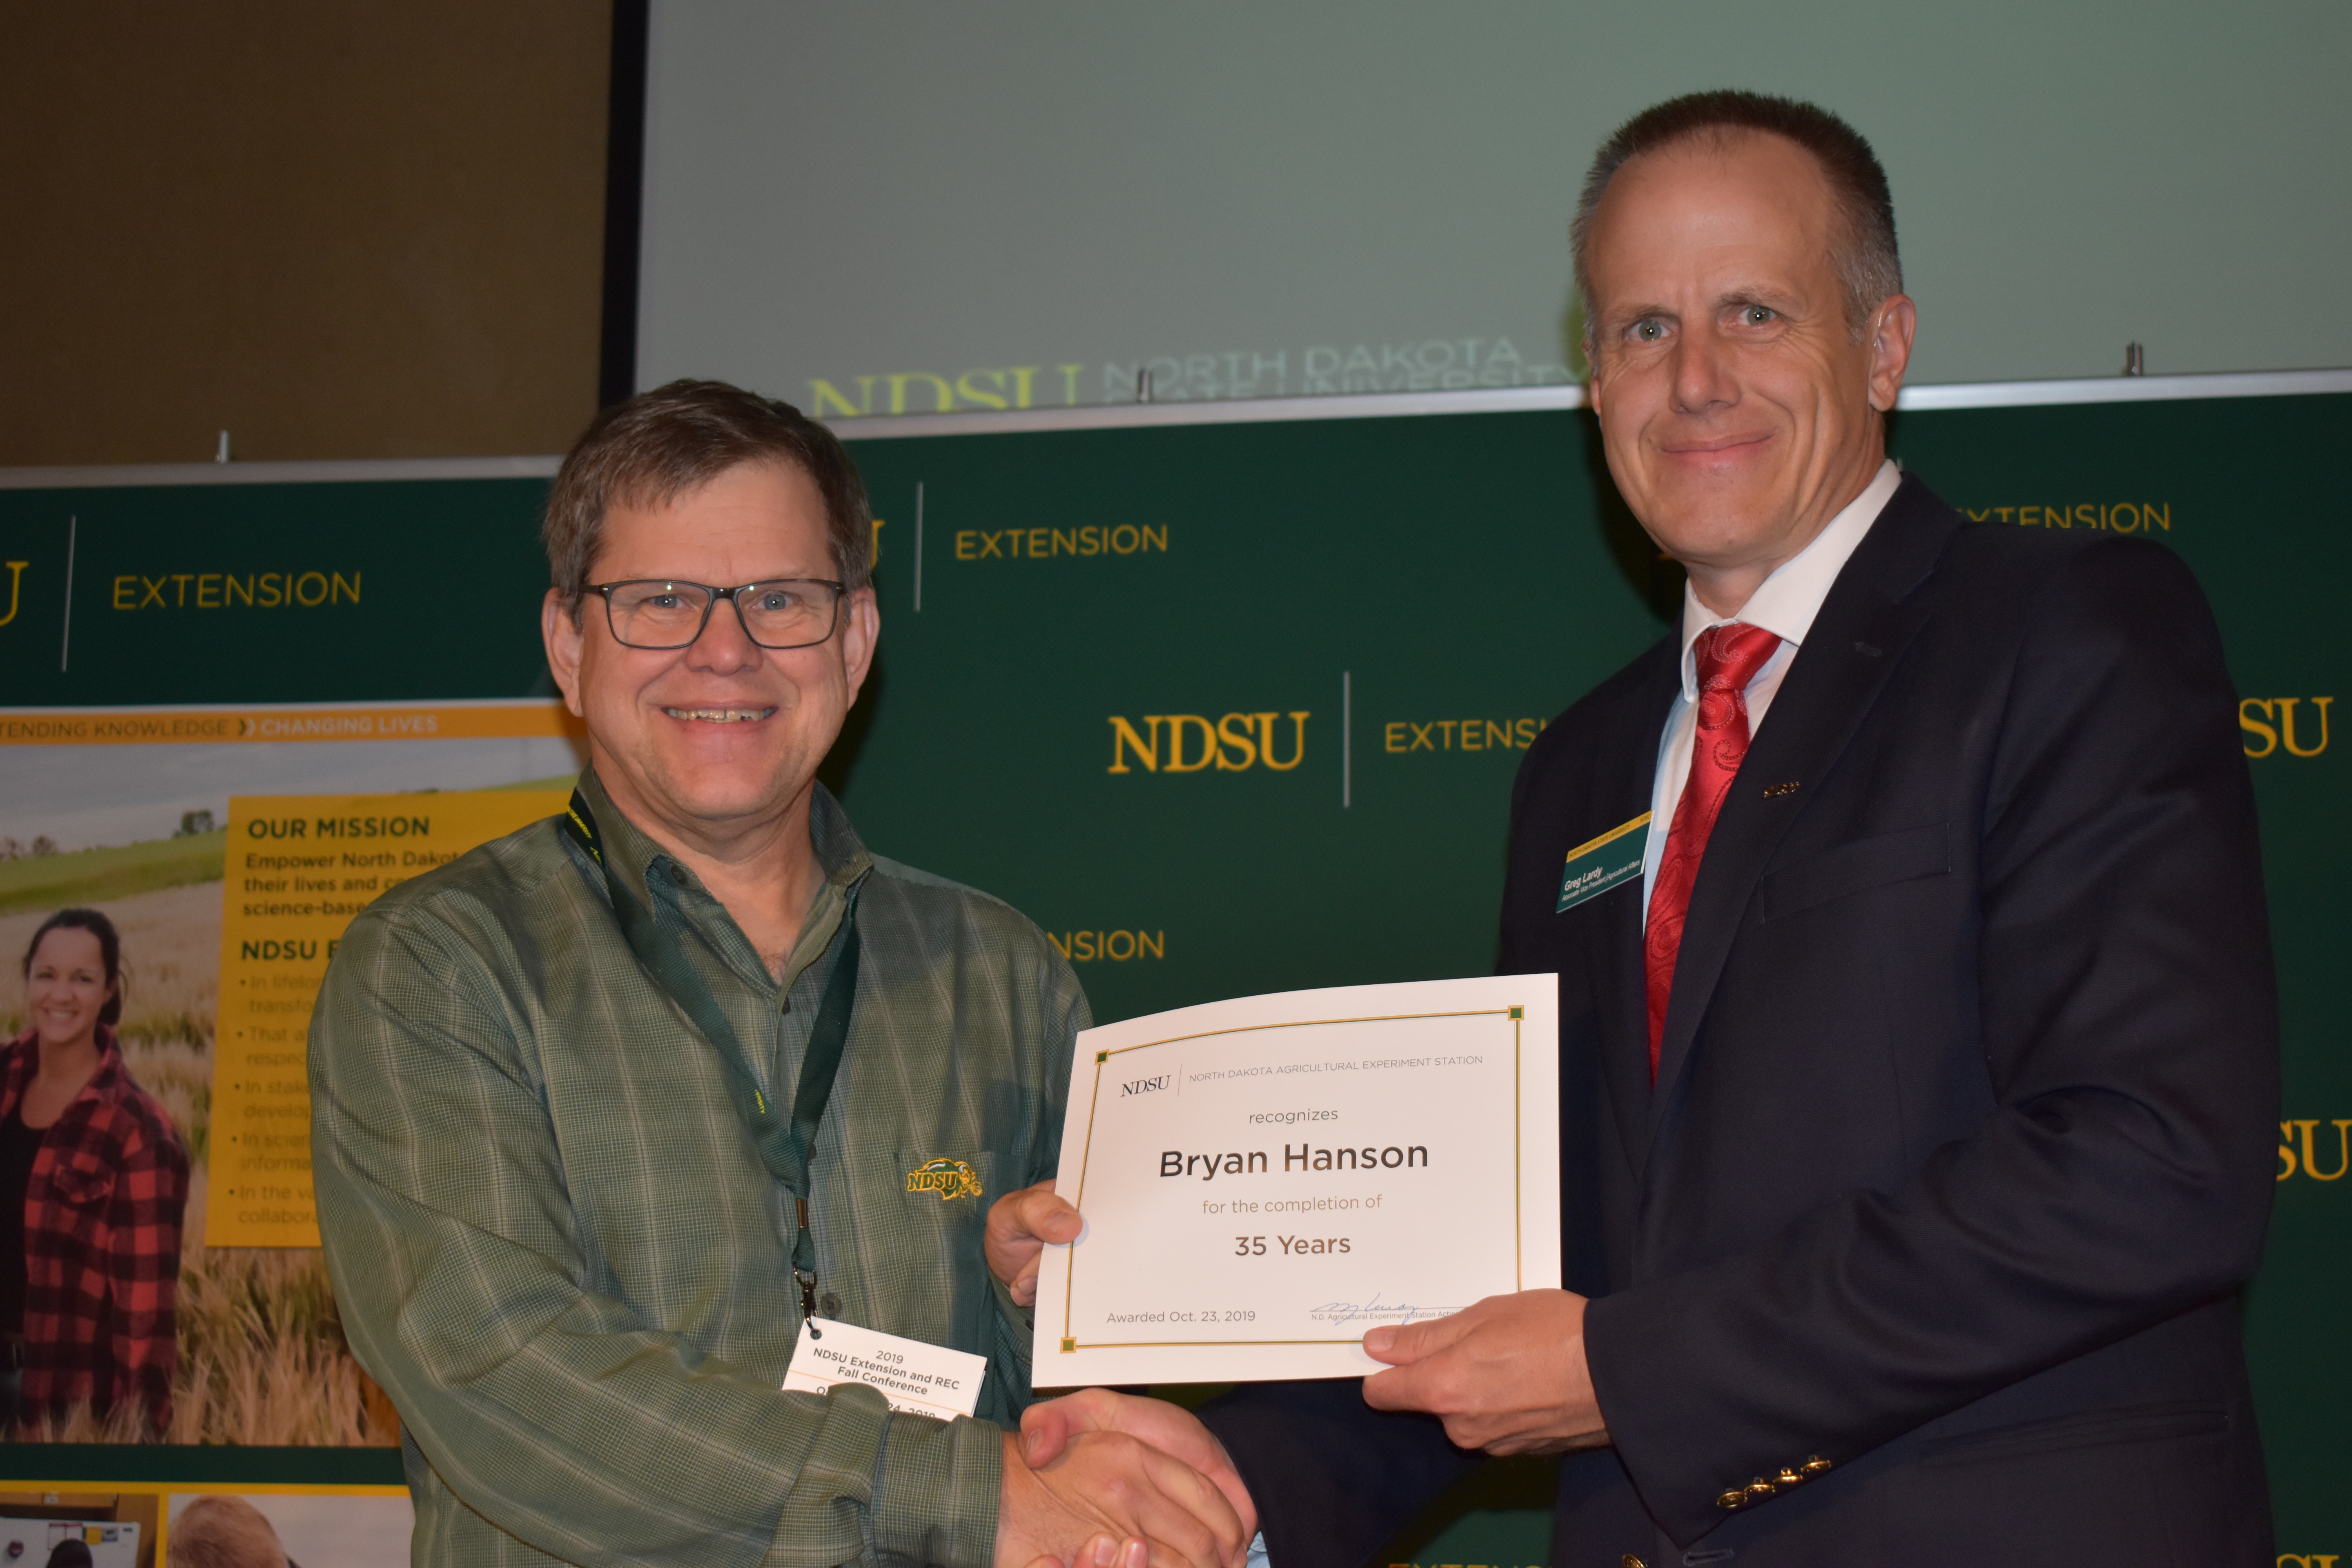 Bryan Hanson, research agronomist, is honored for his 35 years of service to the Langdon Research Extension Center.